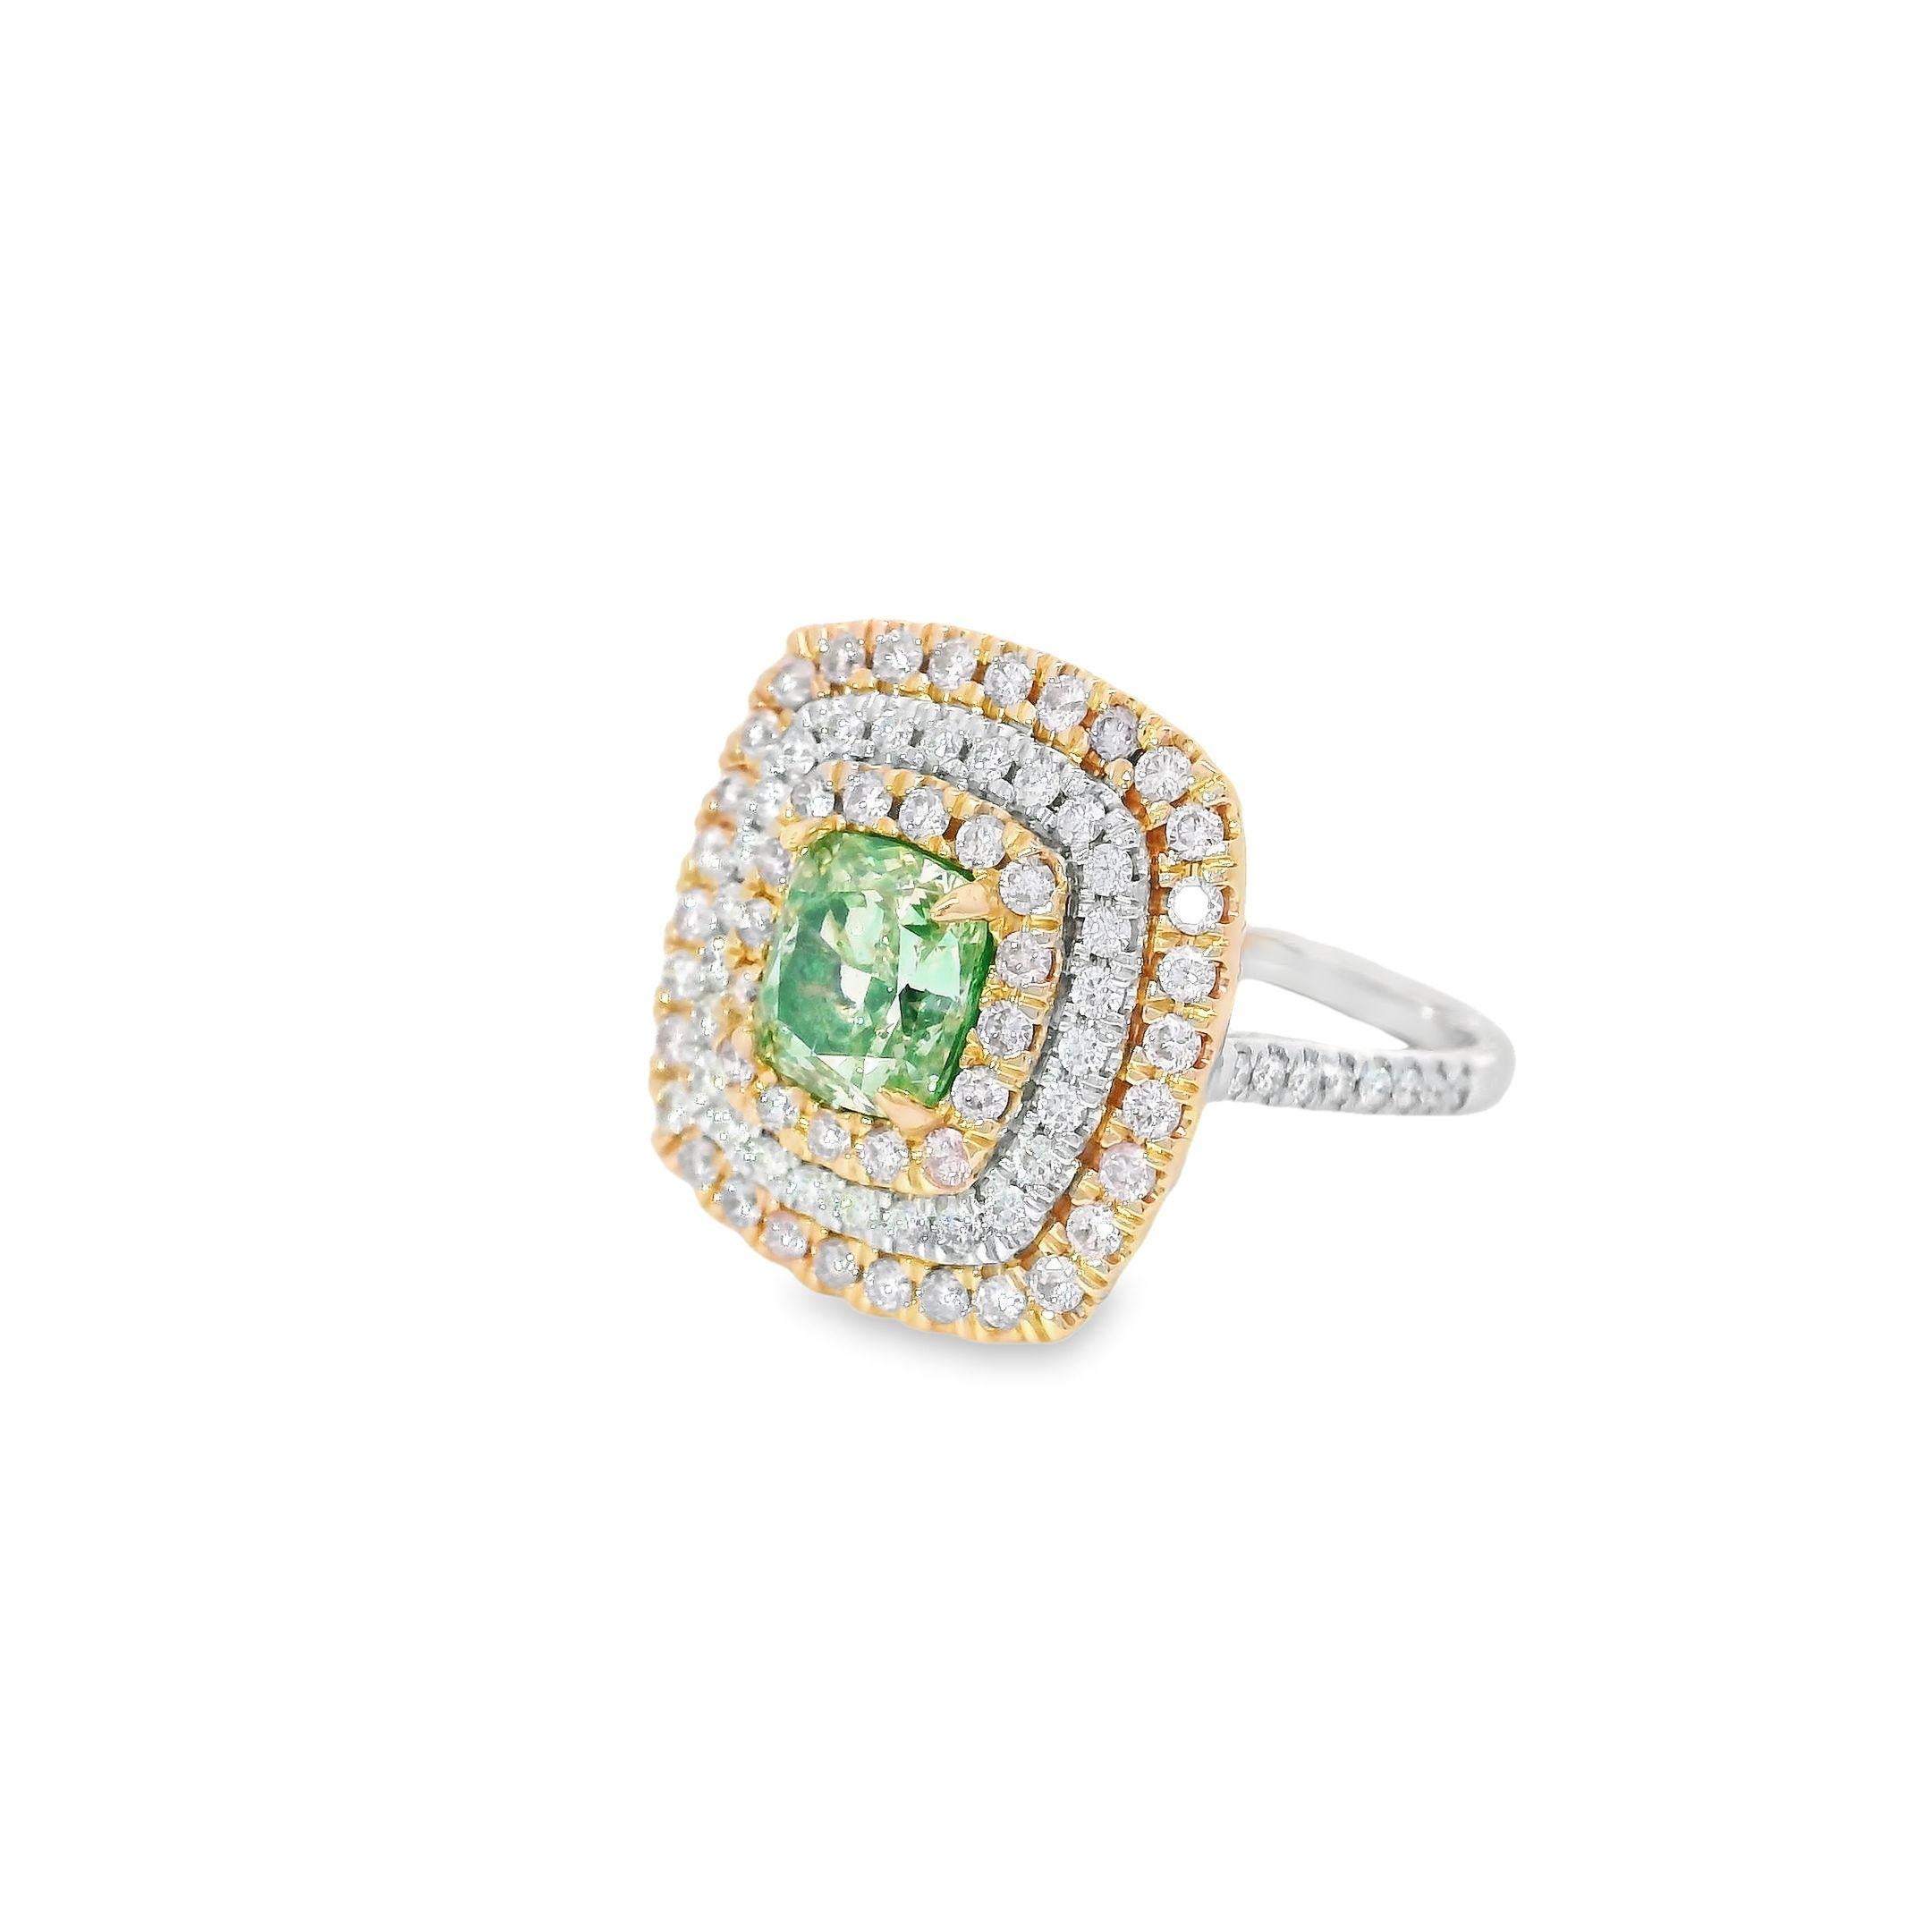 **100% NATURAL FANCY COLOUR DIAMOND JEWELRY**

✪ Jewelry Details ✪

♦ MAIN STONE DETAILS

➛ Stone Shape: Cushion
➛ Stone Color: Fancy Green
➛ Stone Weight: 1.51 carats
➛ Clarity: VS
➛ AGL certified

♦ SIDE STONE DETAILS

➛ Side White diamonds - 108